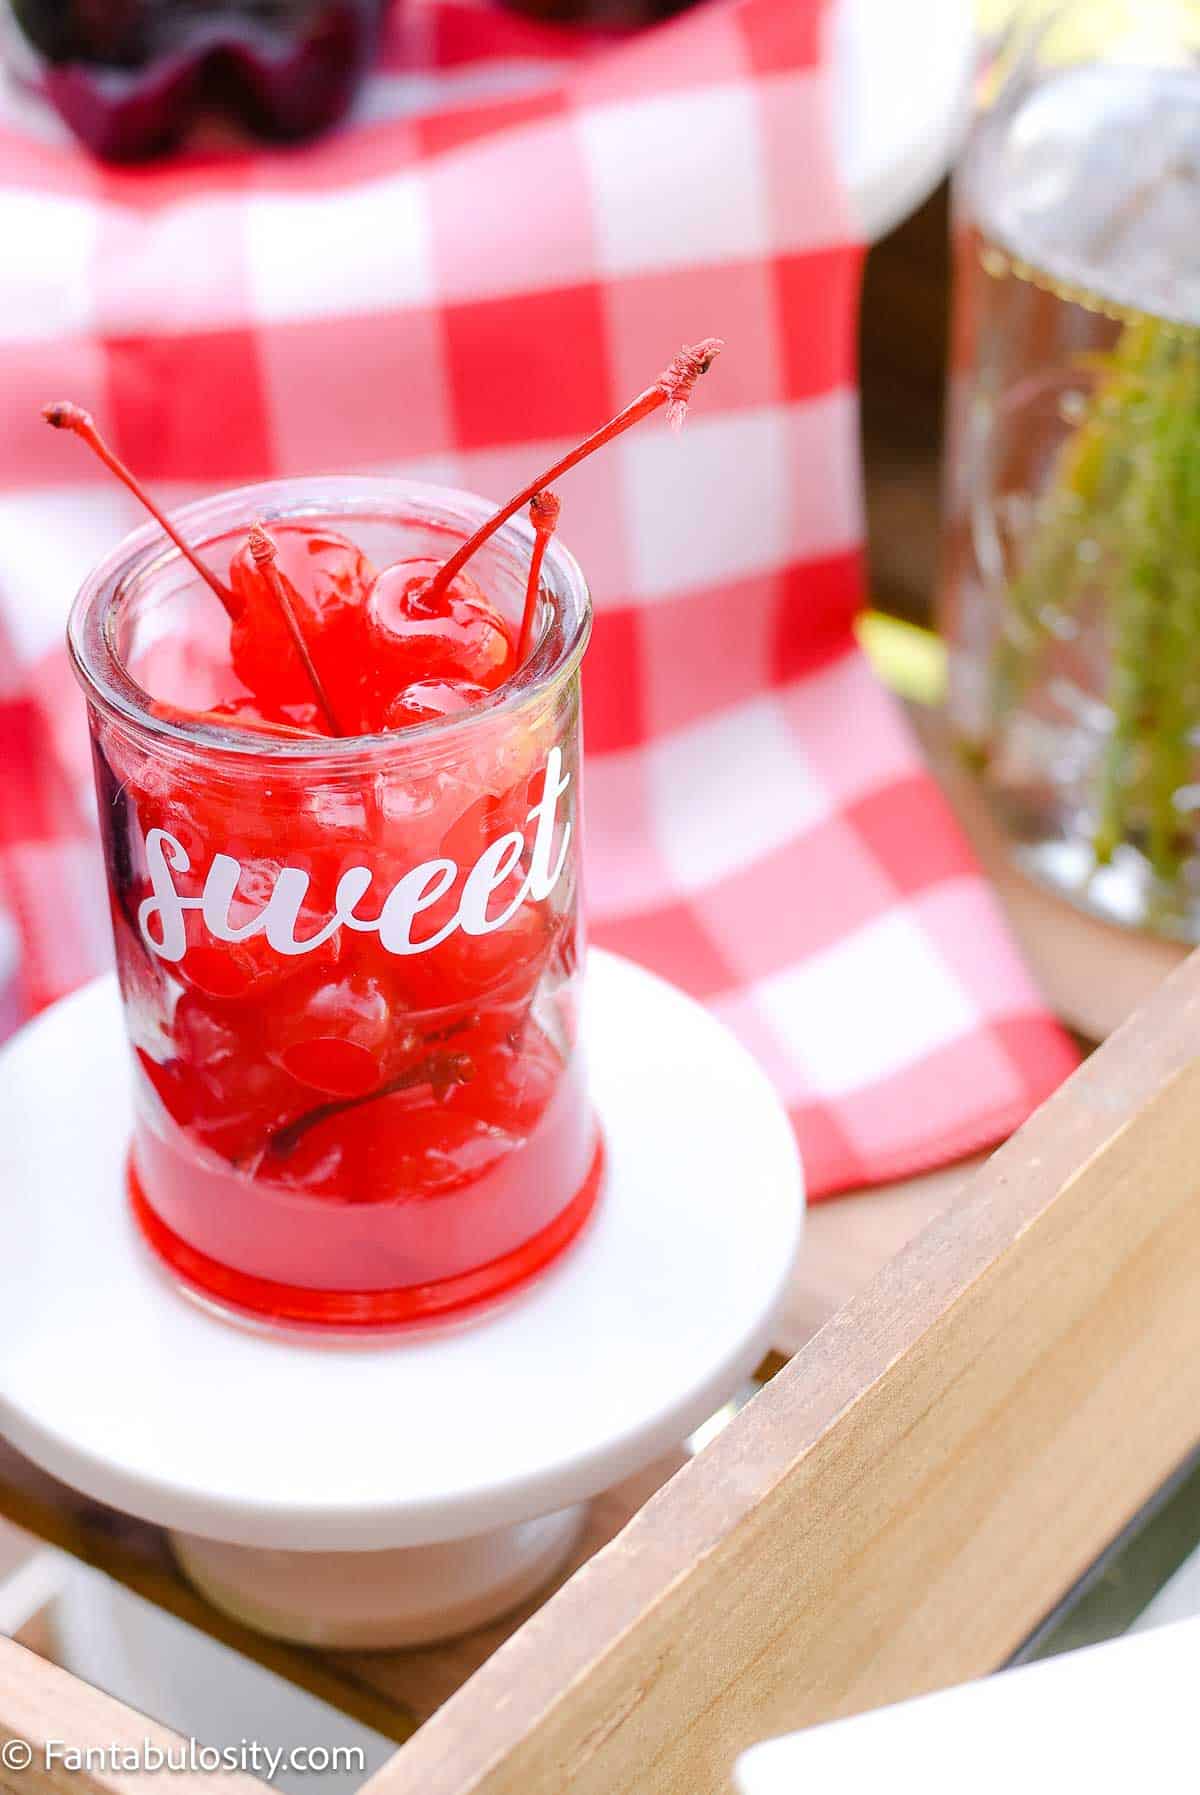 Cherries in small glass jar, sitting on drink station.